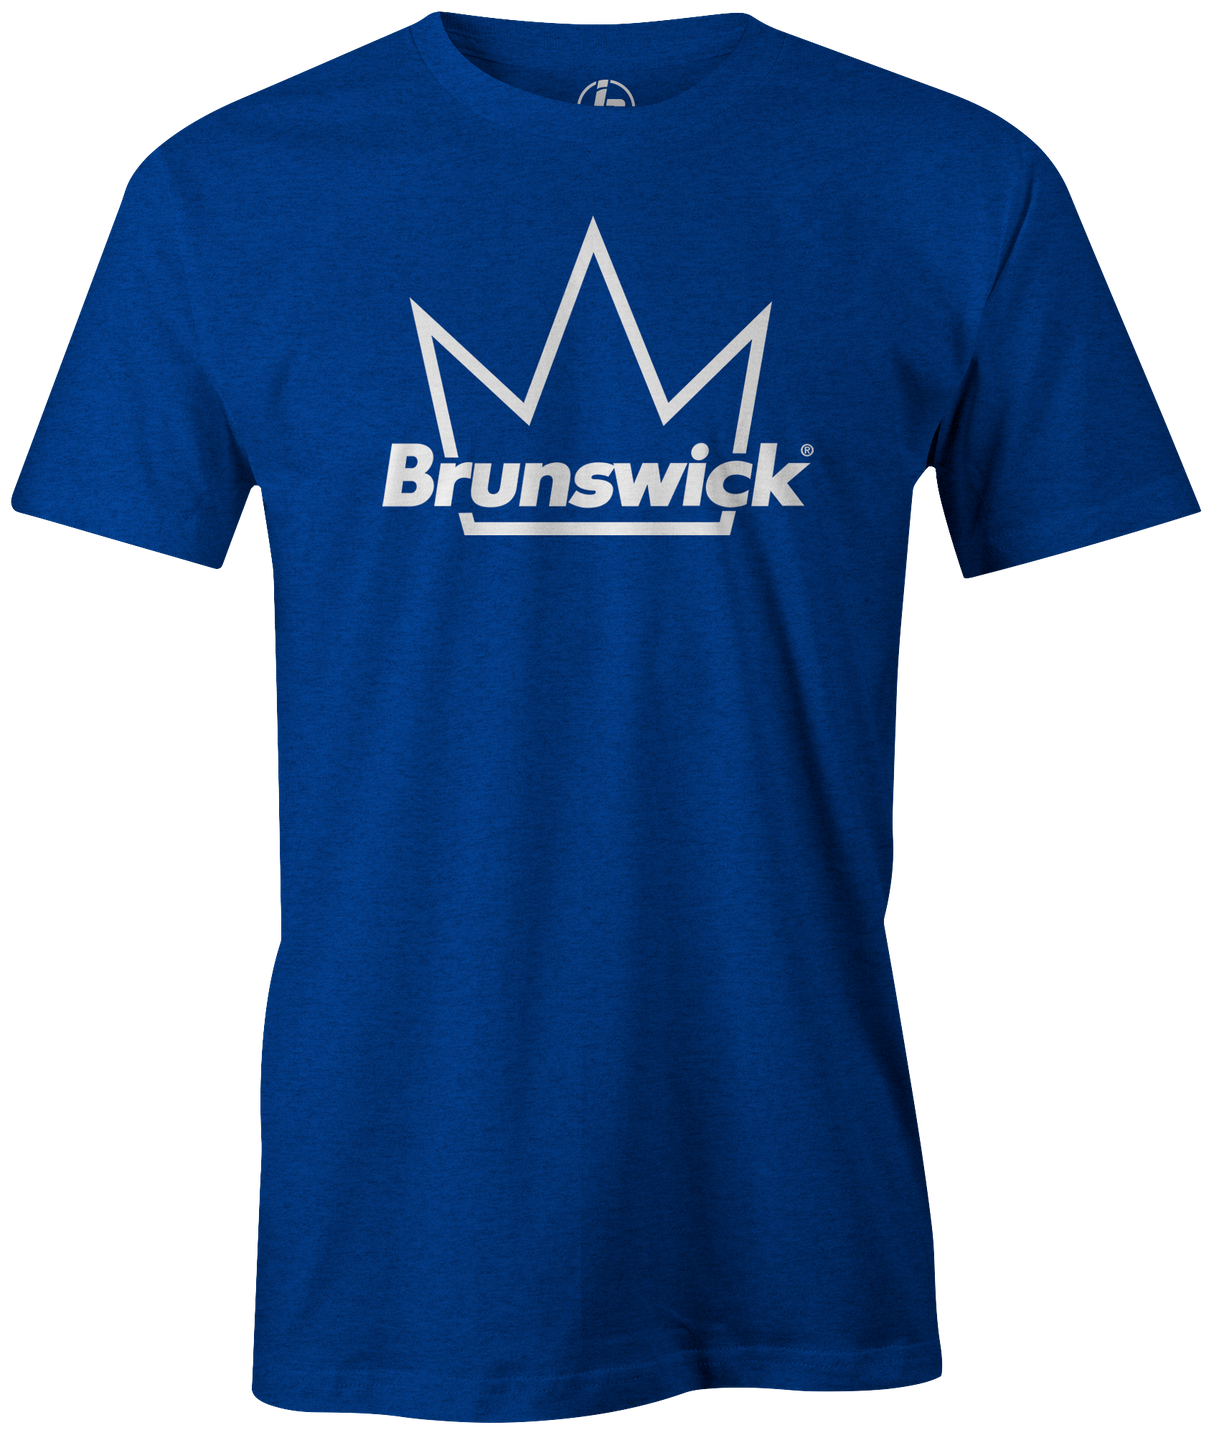 Over the years the Brunswick brand has delivered so much to bowlers all over the world. Their experience has led to many amazing products. Pick up the Brunswick Bowling Crown Tee today! blue